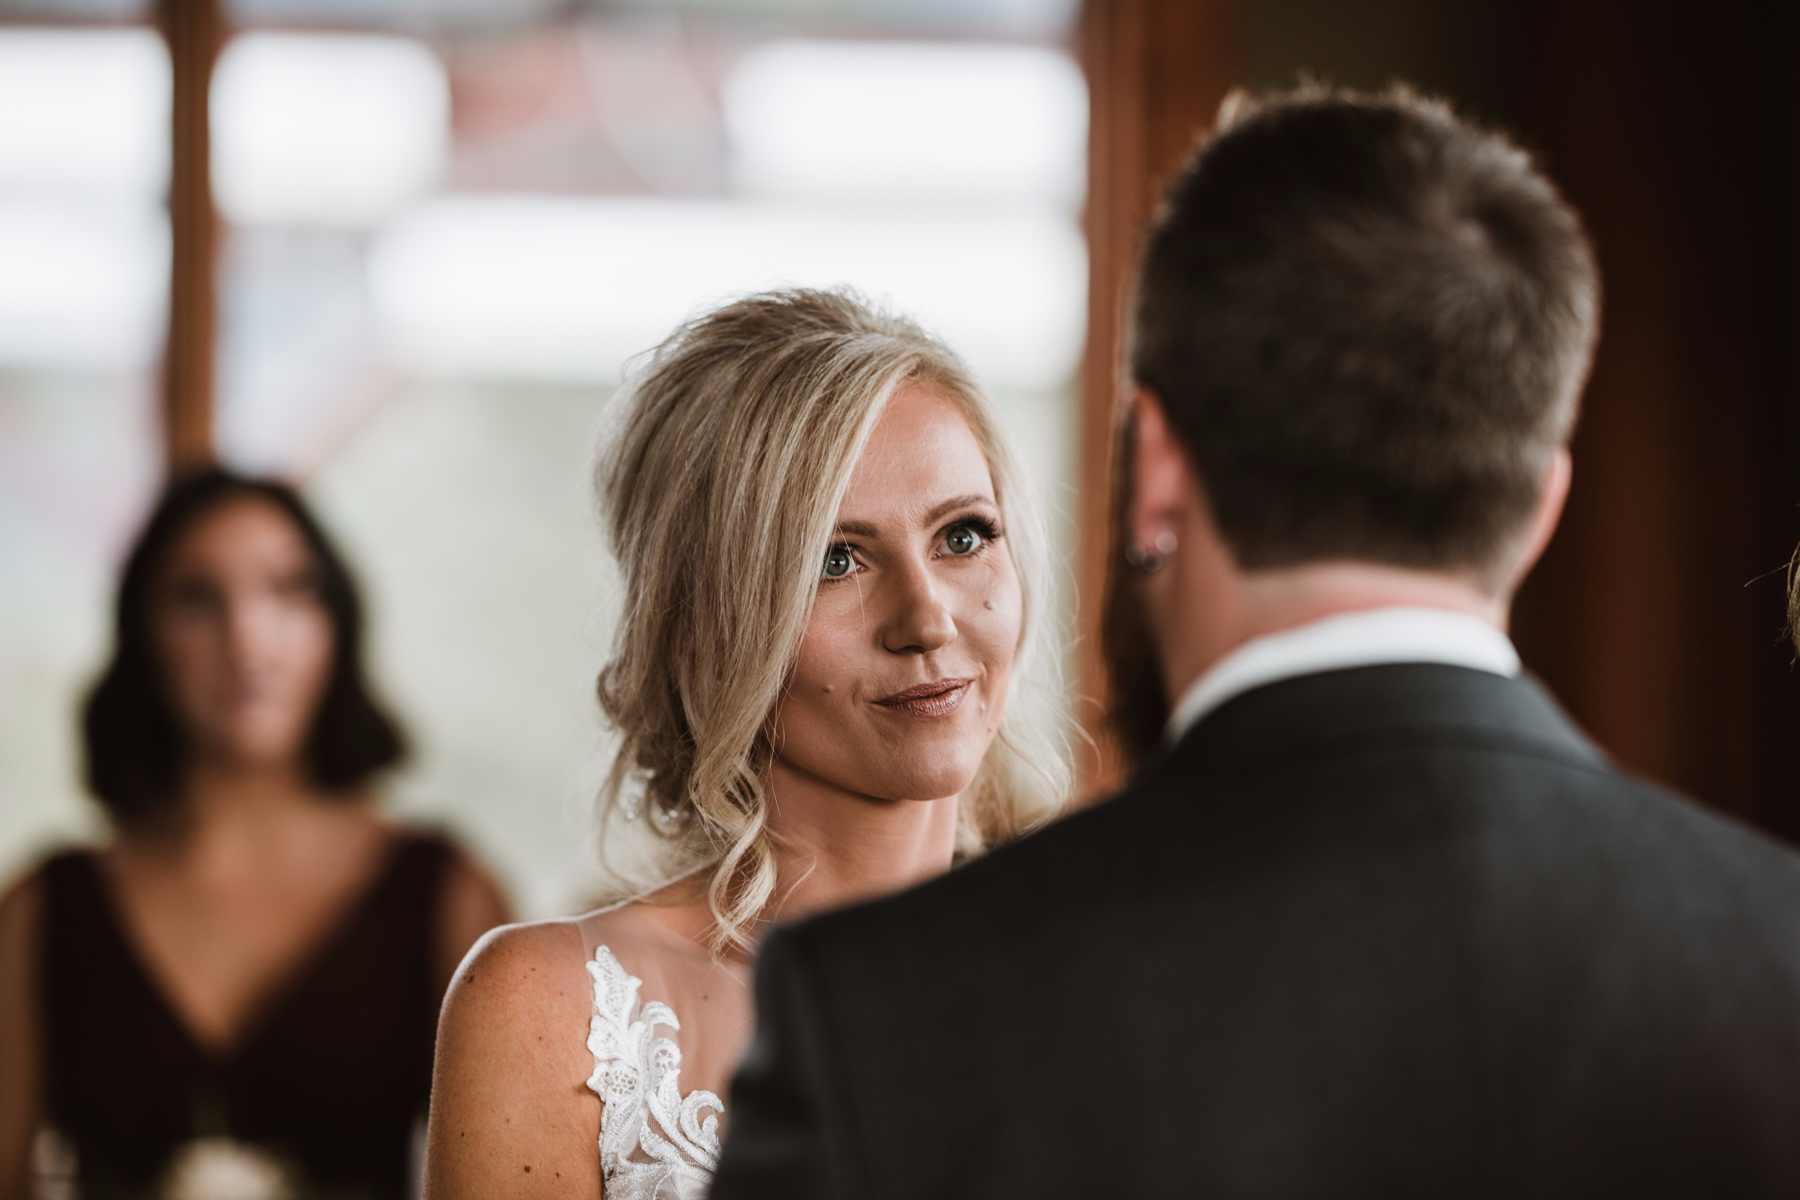 Calgary wedding photographer in Invermere for adventurous mountain destination elopement at Eagle Ranch Golf Resort, British Columbia - Image 15